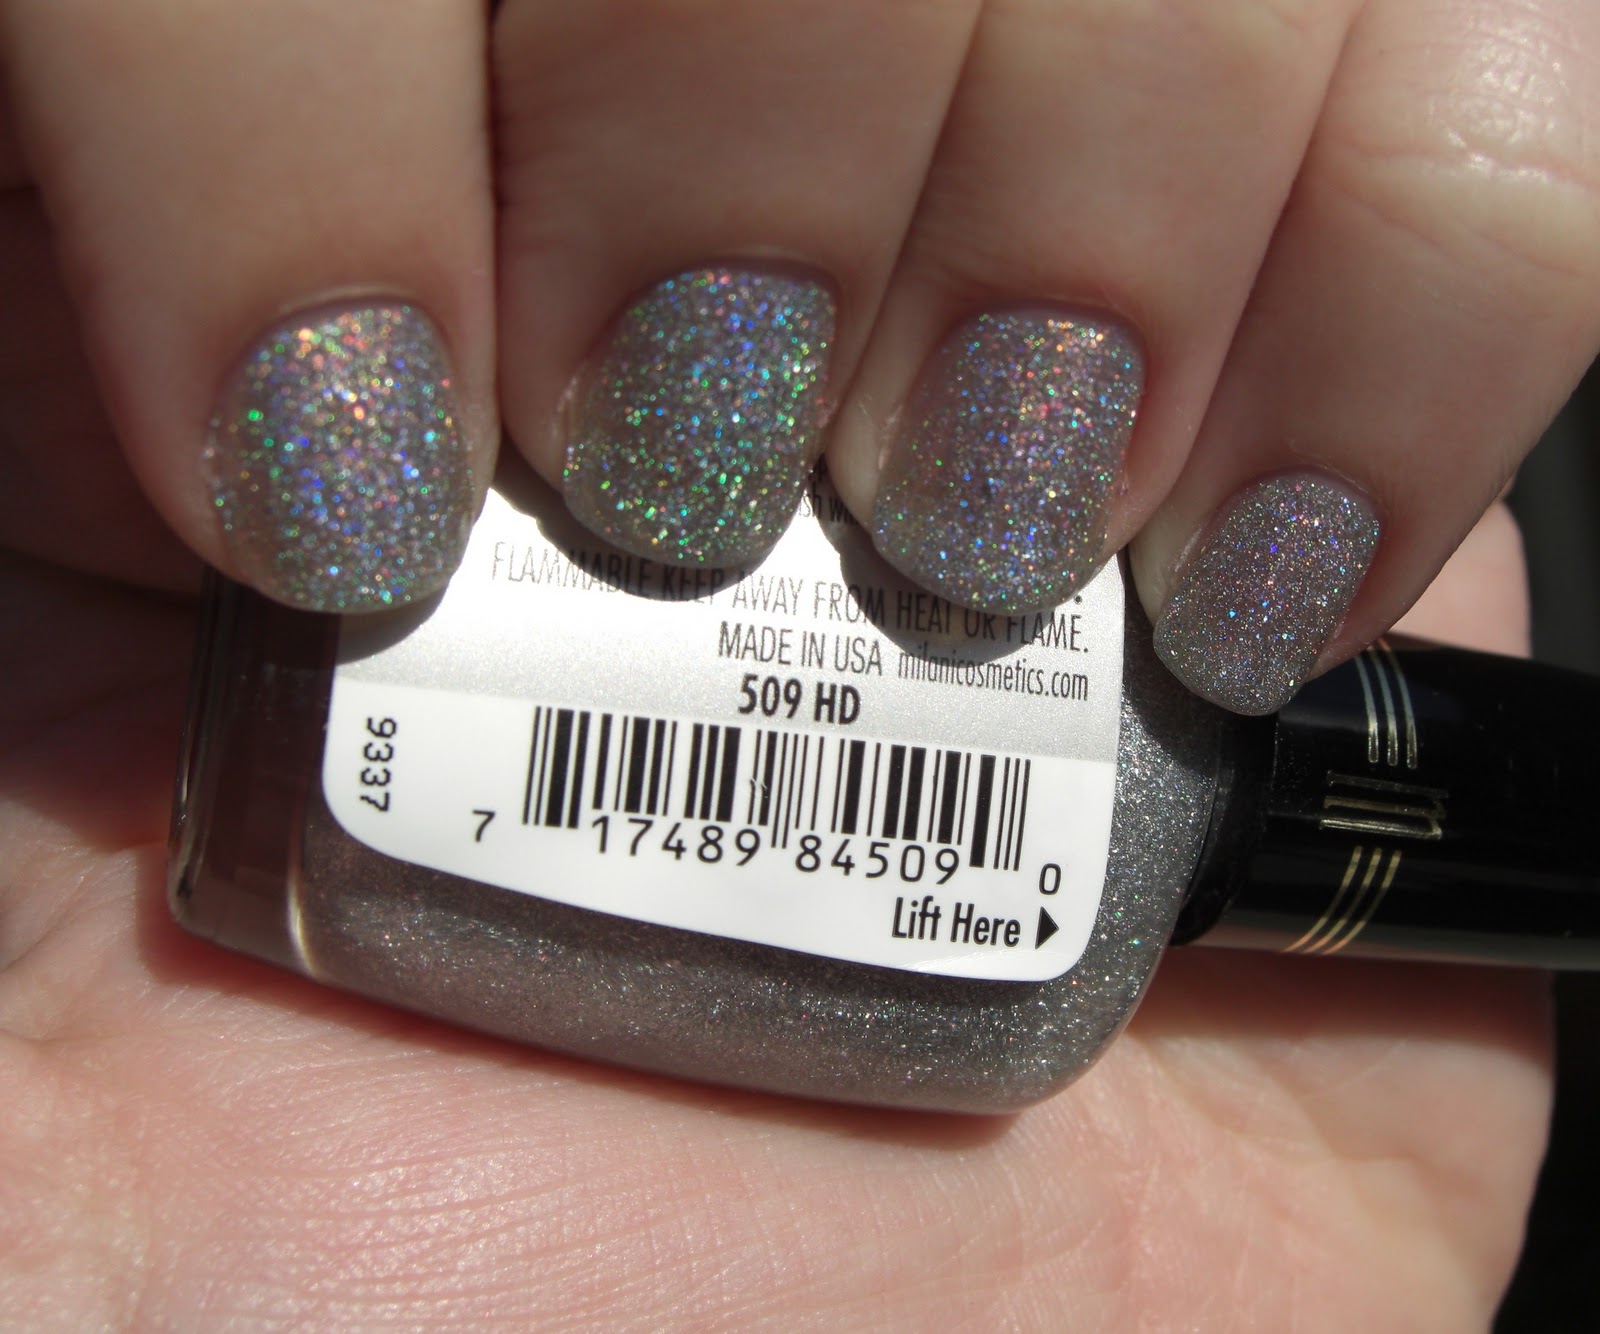 glitter obsession: Milani 3D Holographic Polish in HD